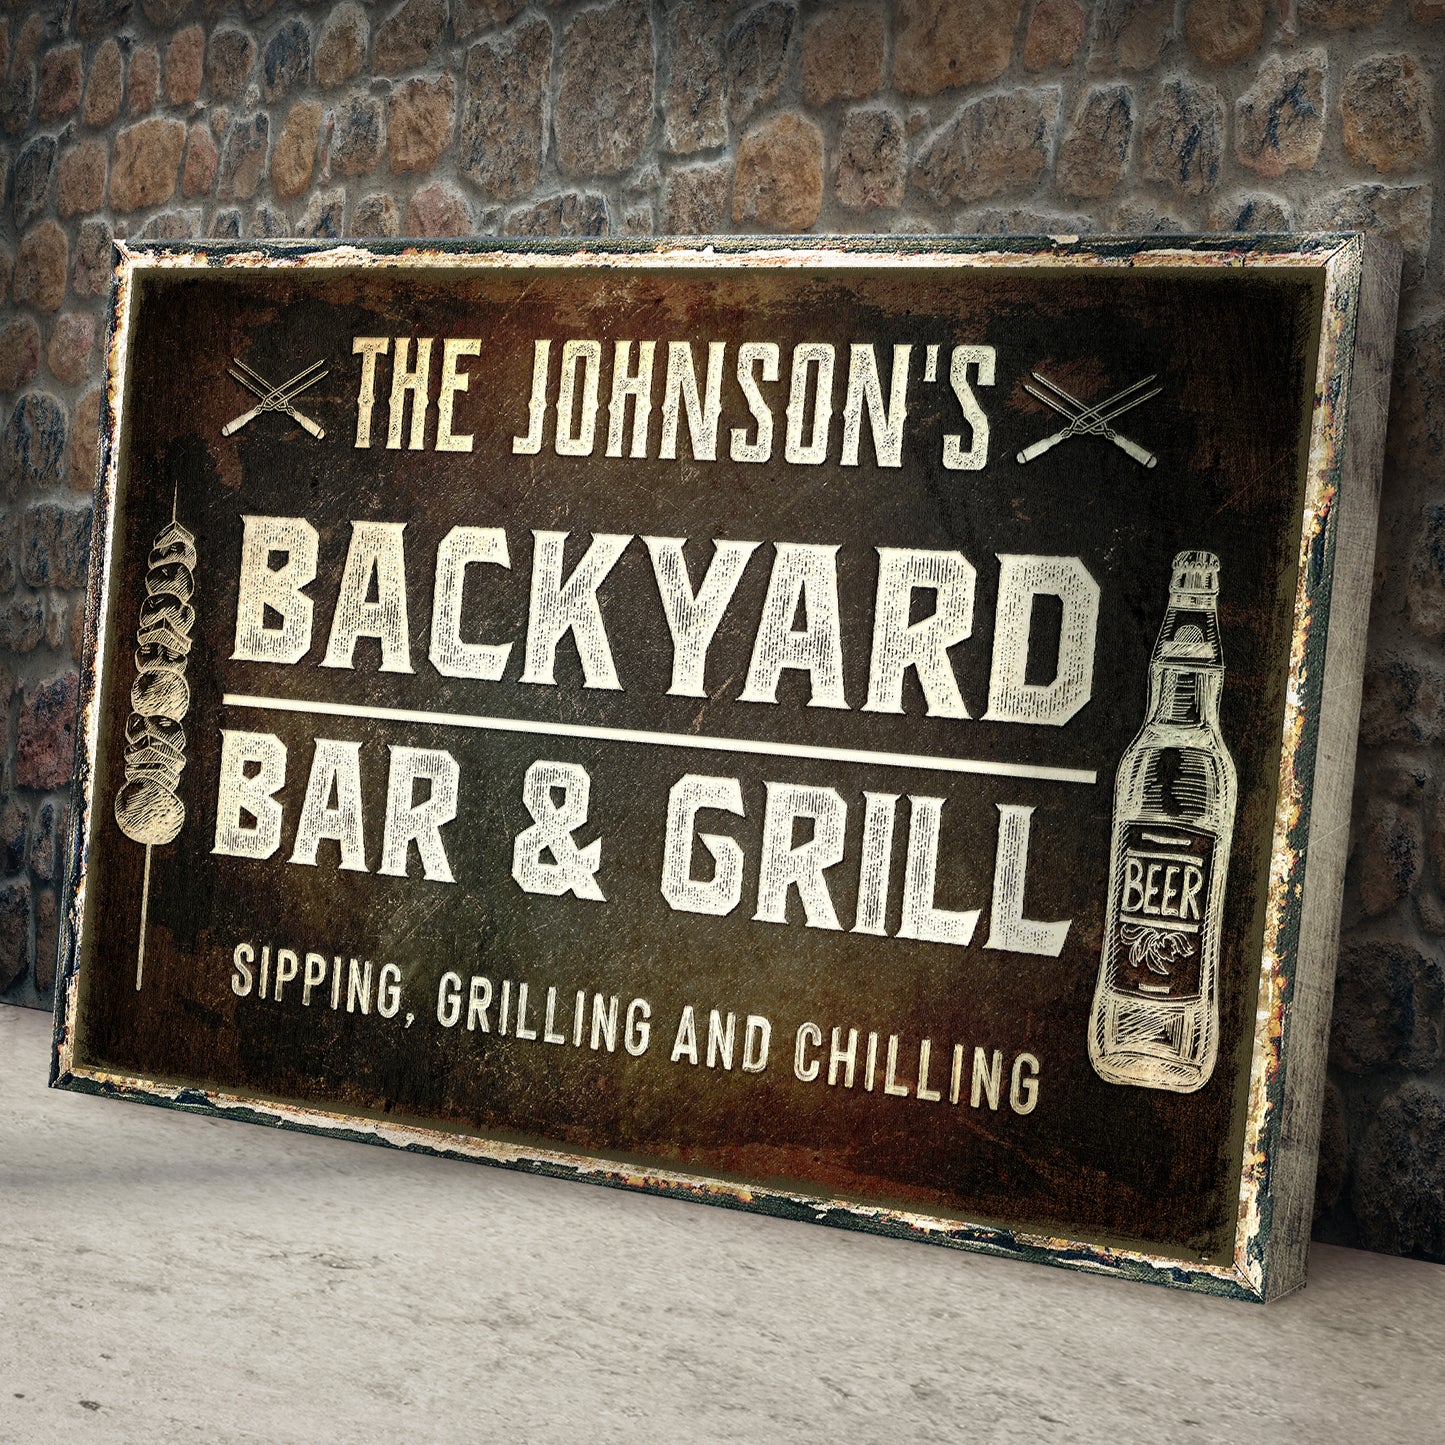 Backyard Bar And Grill Sign Style 2 - Image by Tailored Canvases